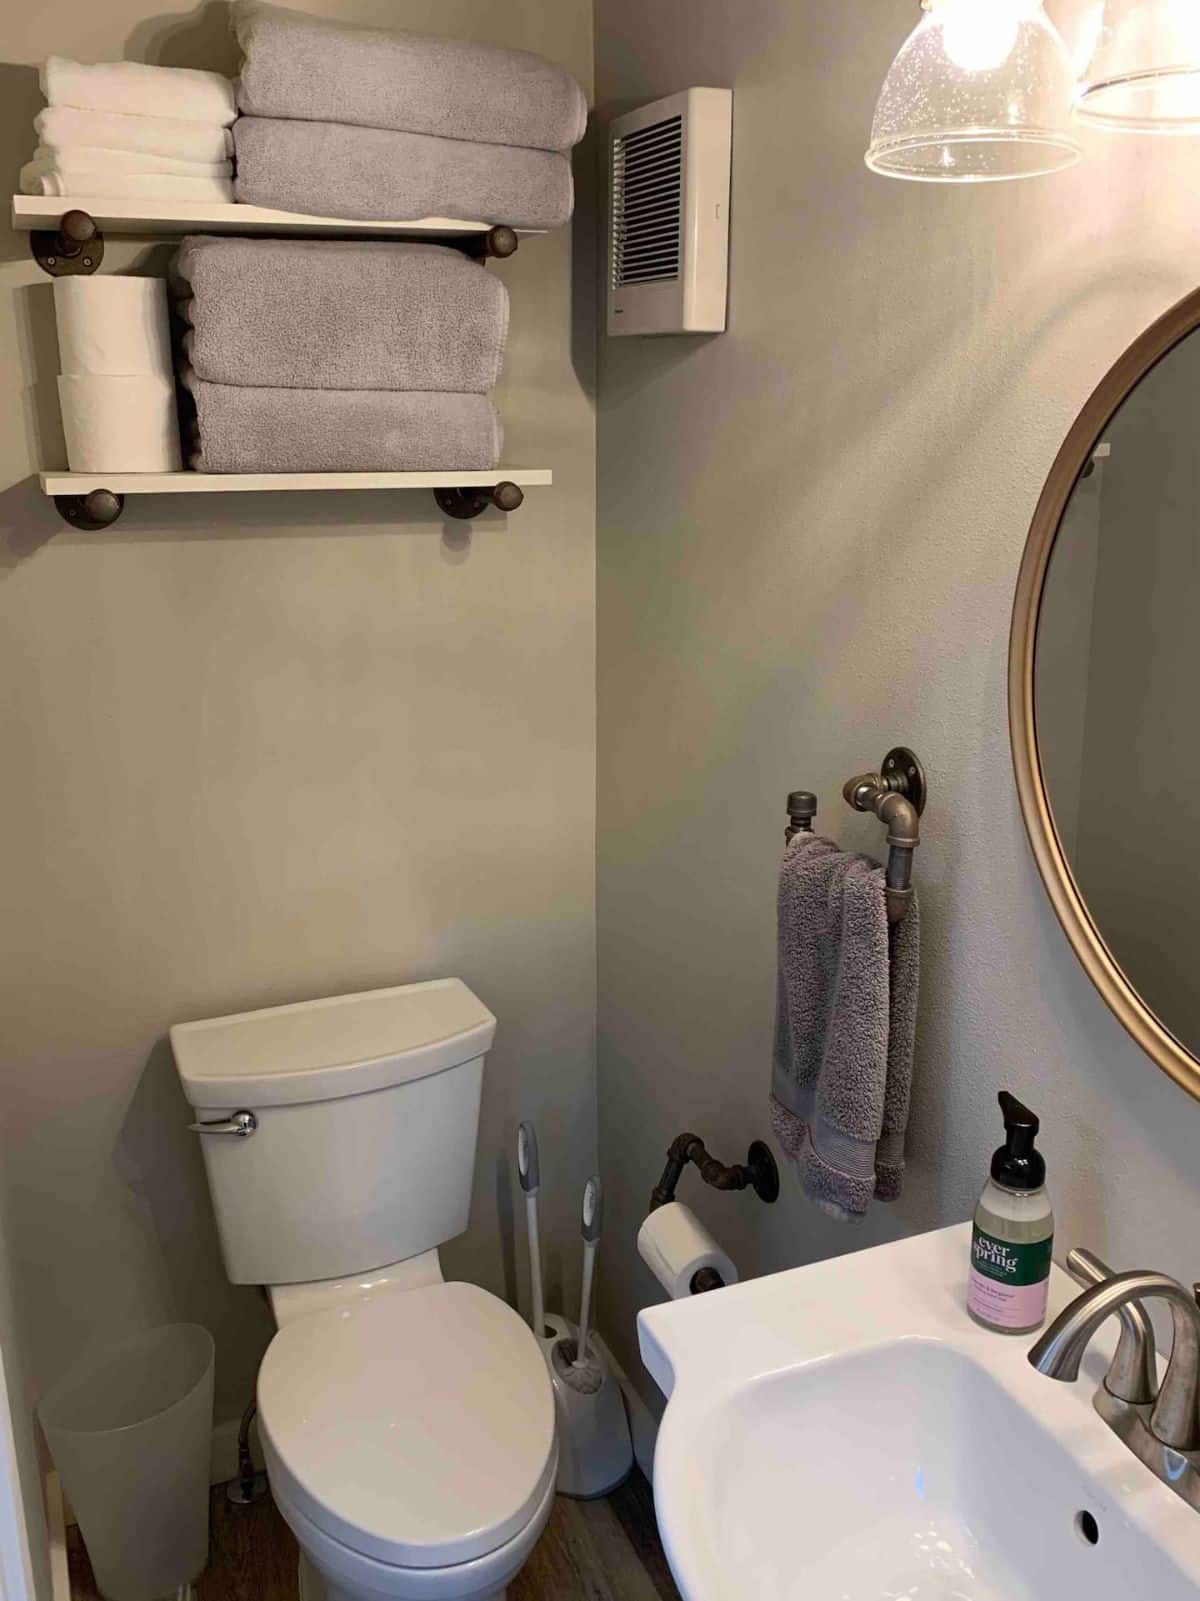 white toilet against gray wall in bathroom